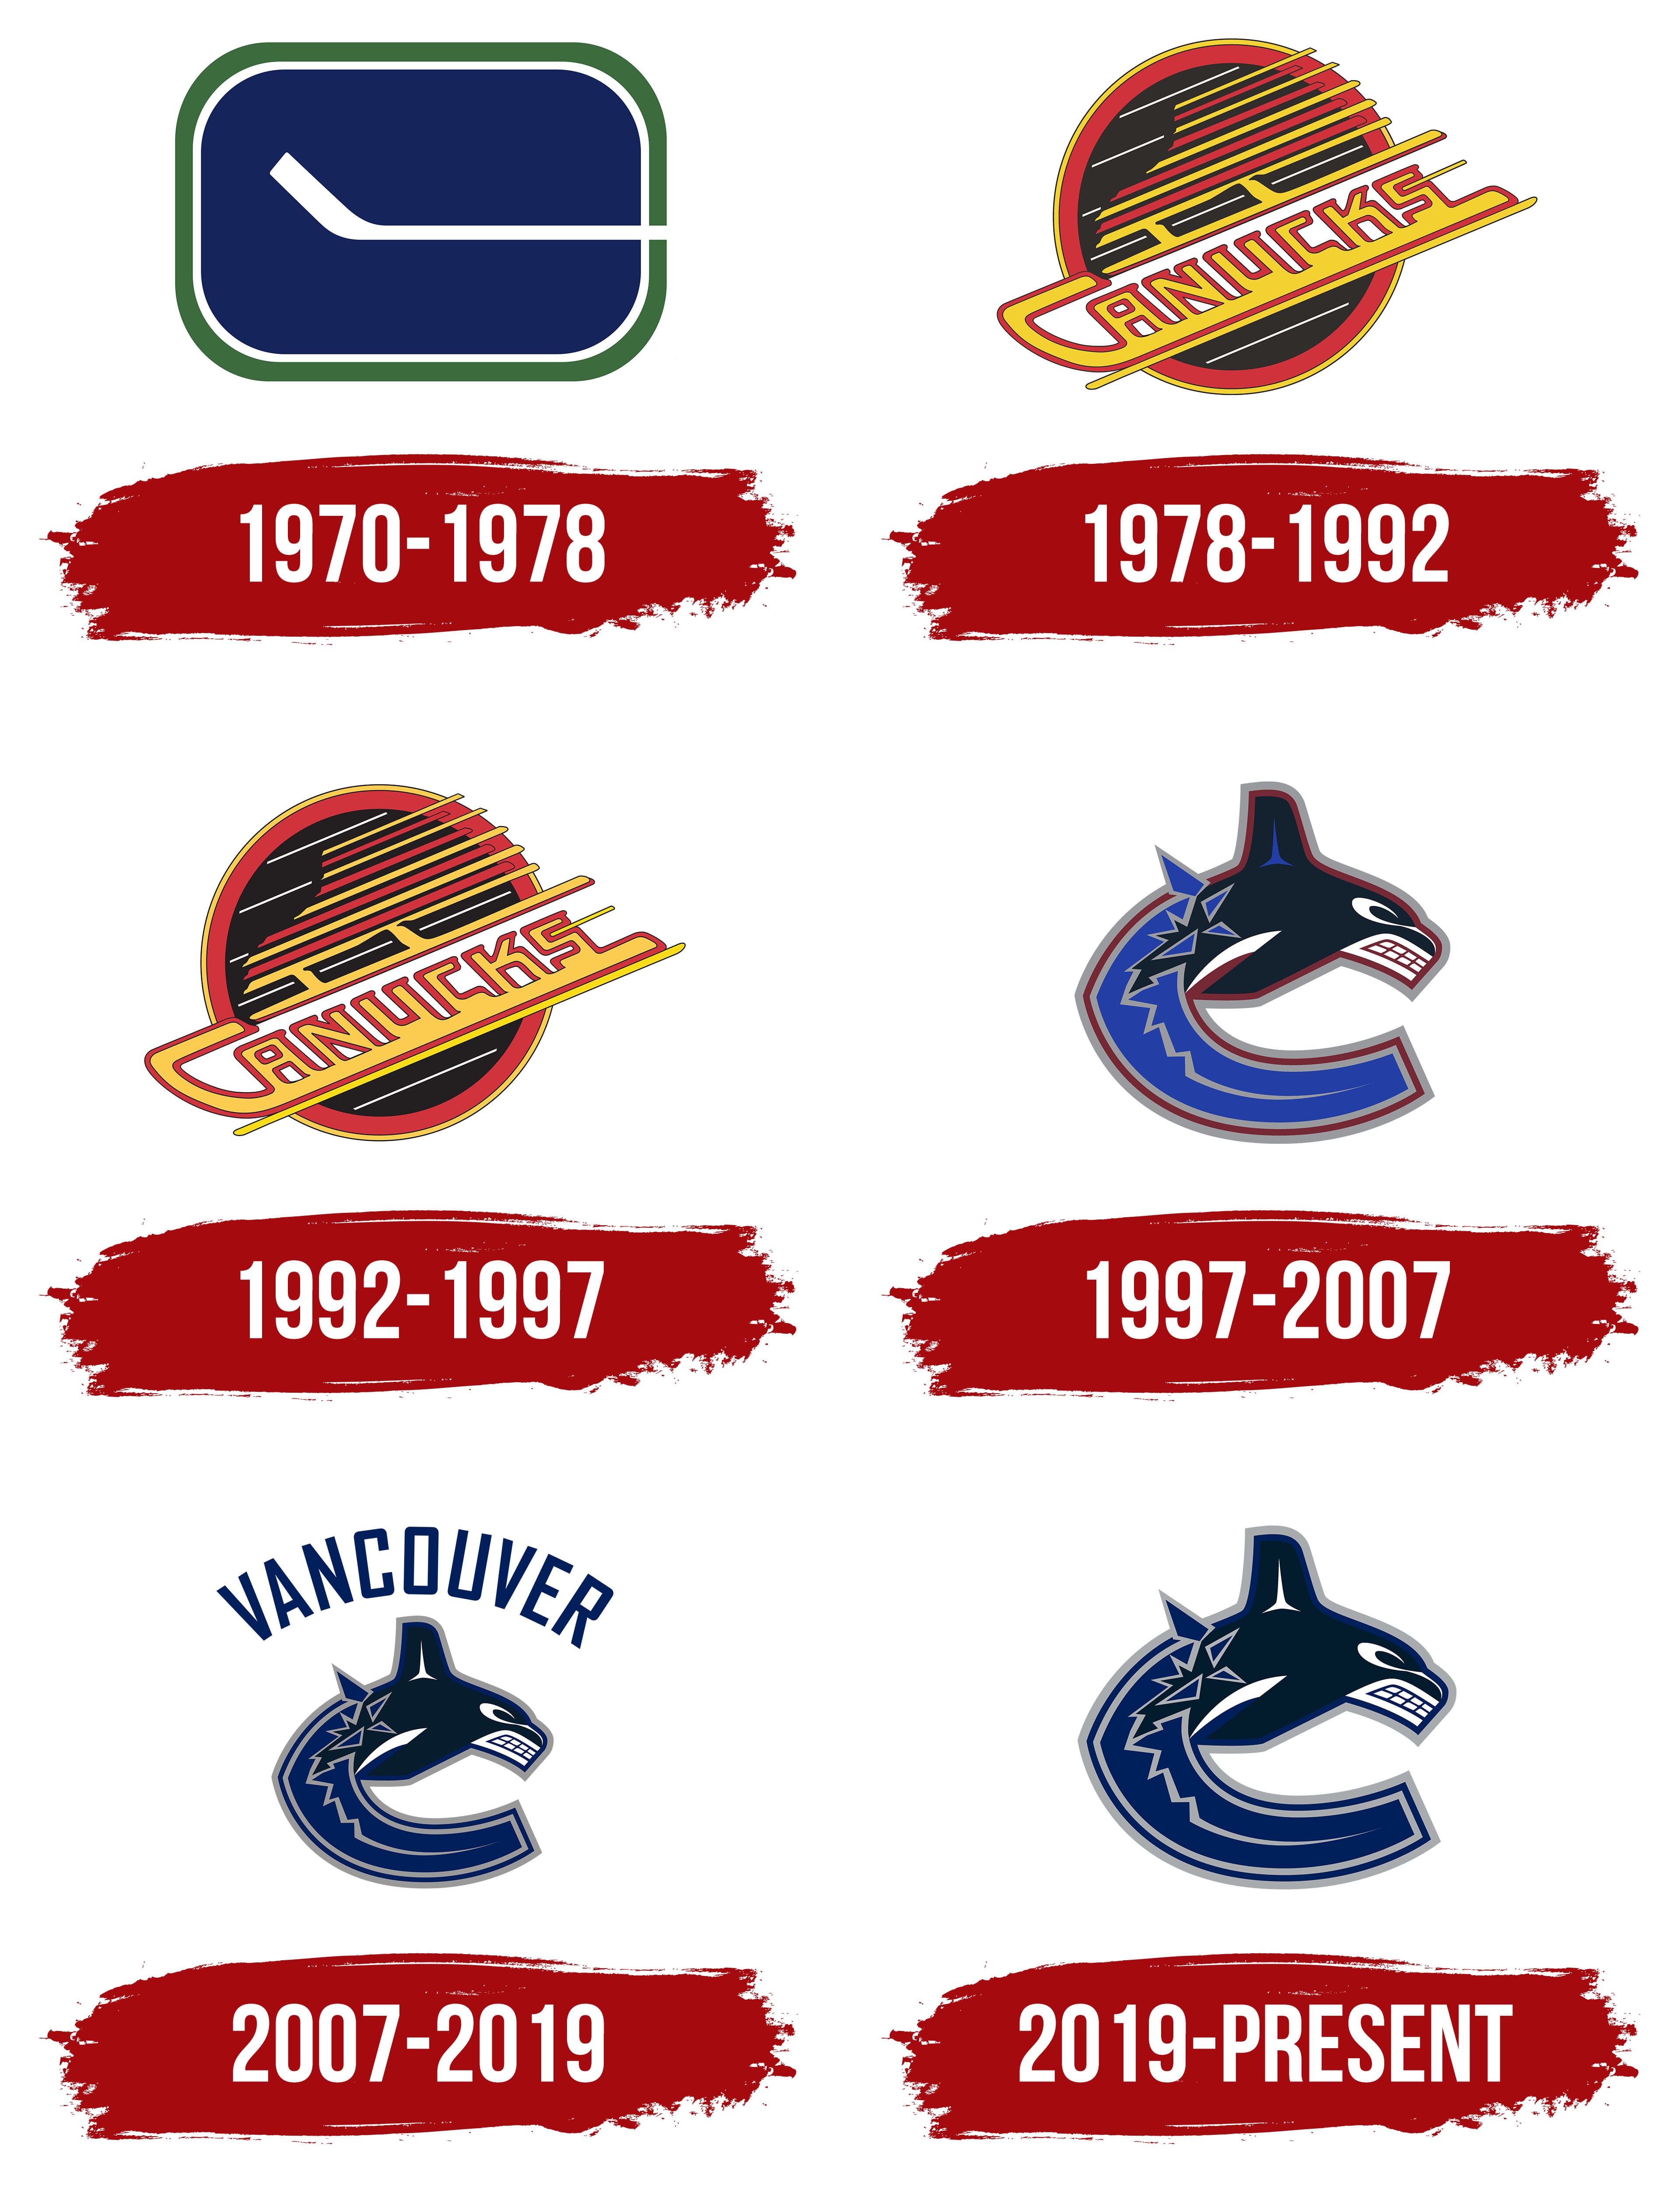 Vancouver Canucks Logo, symbol, meaning, history, PNG, brand